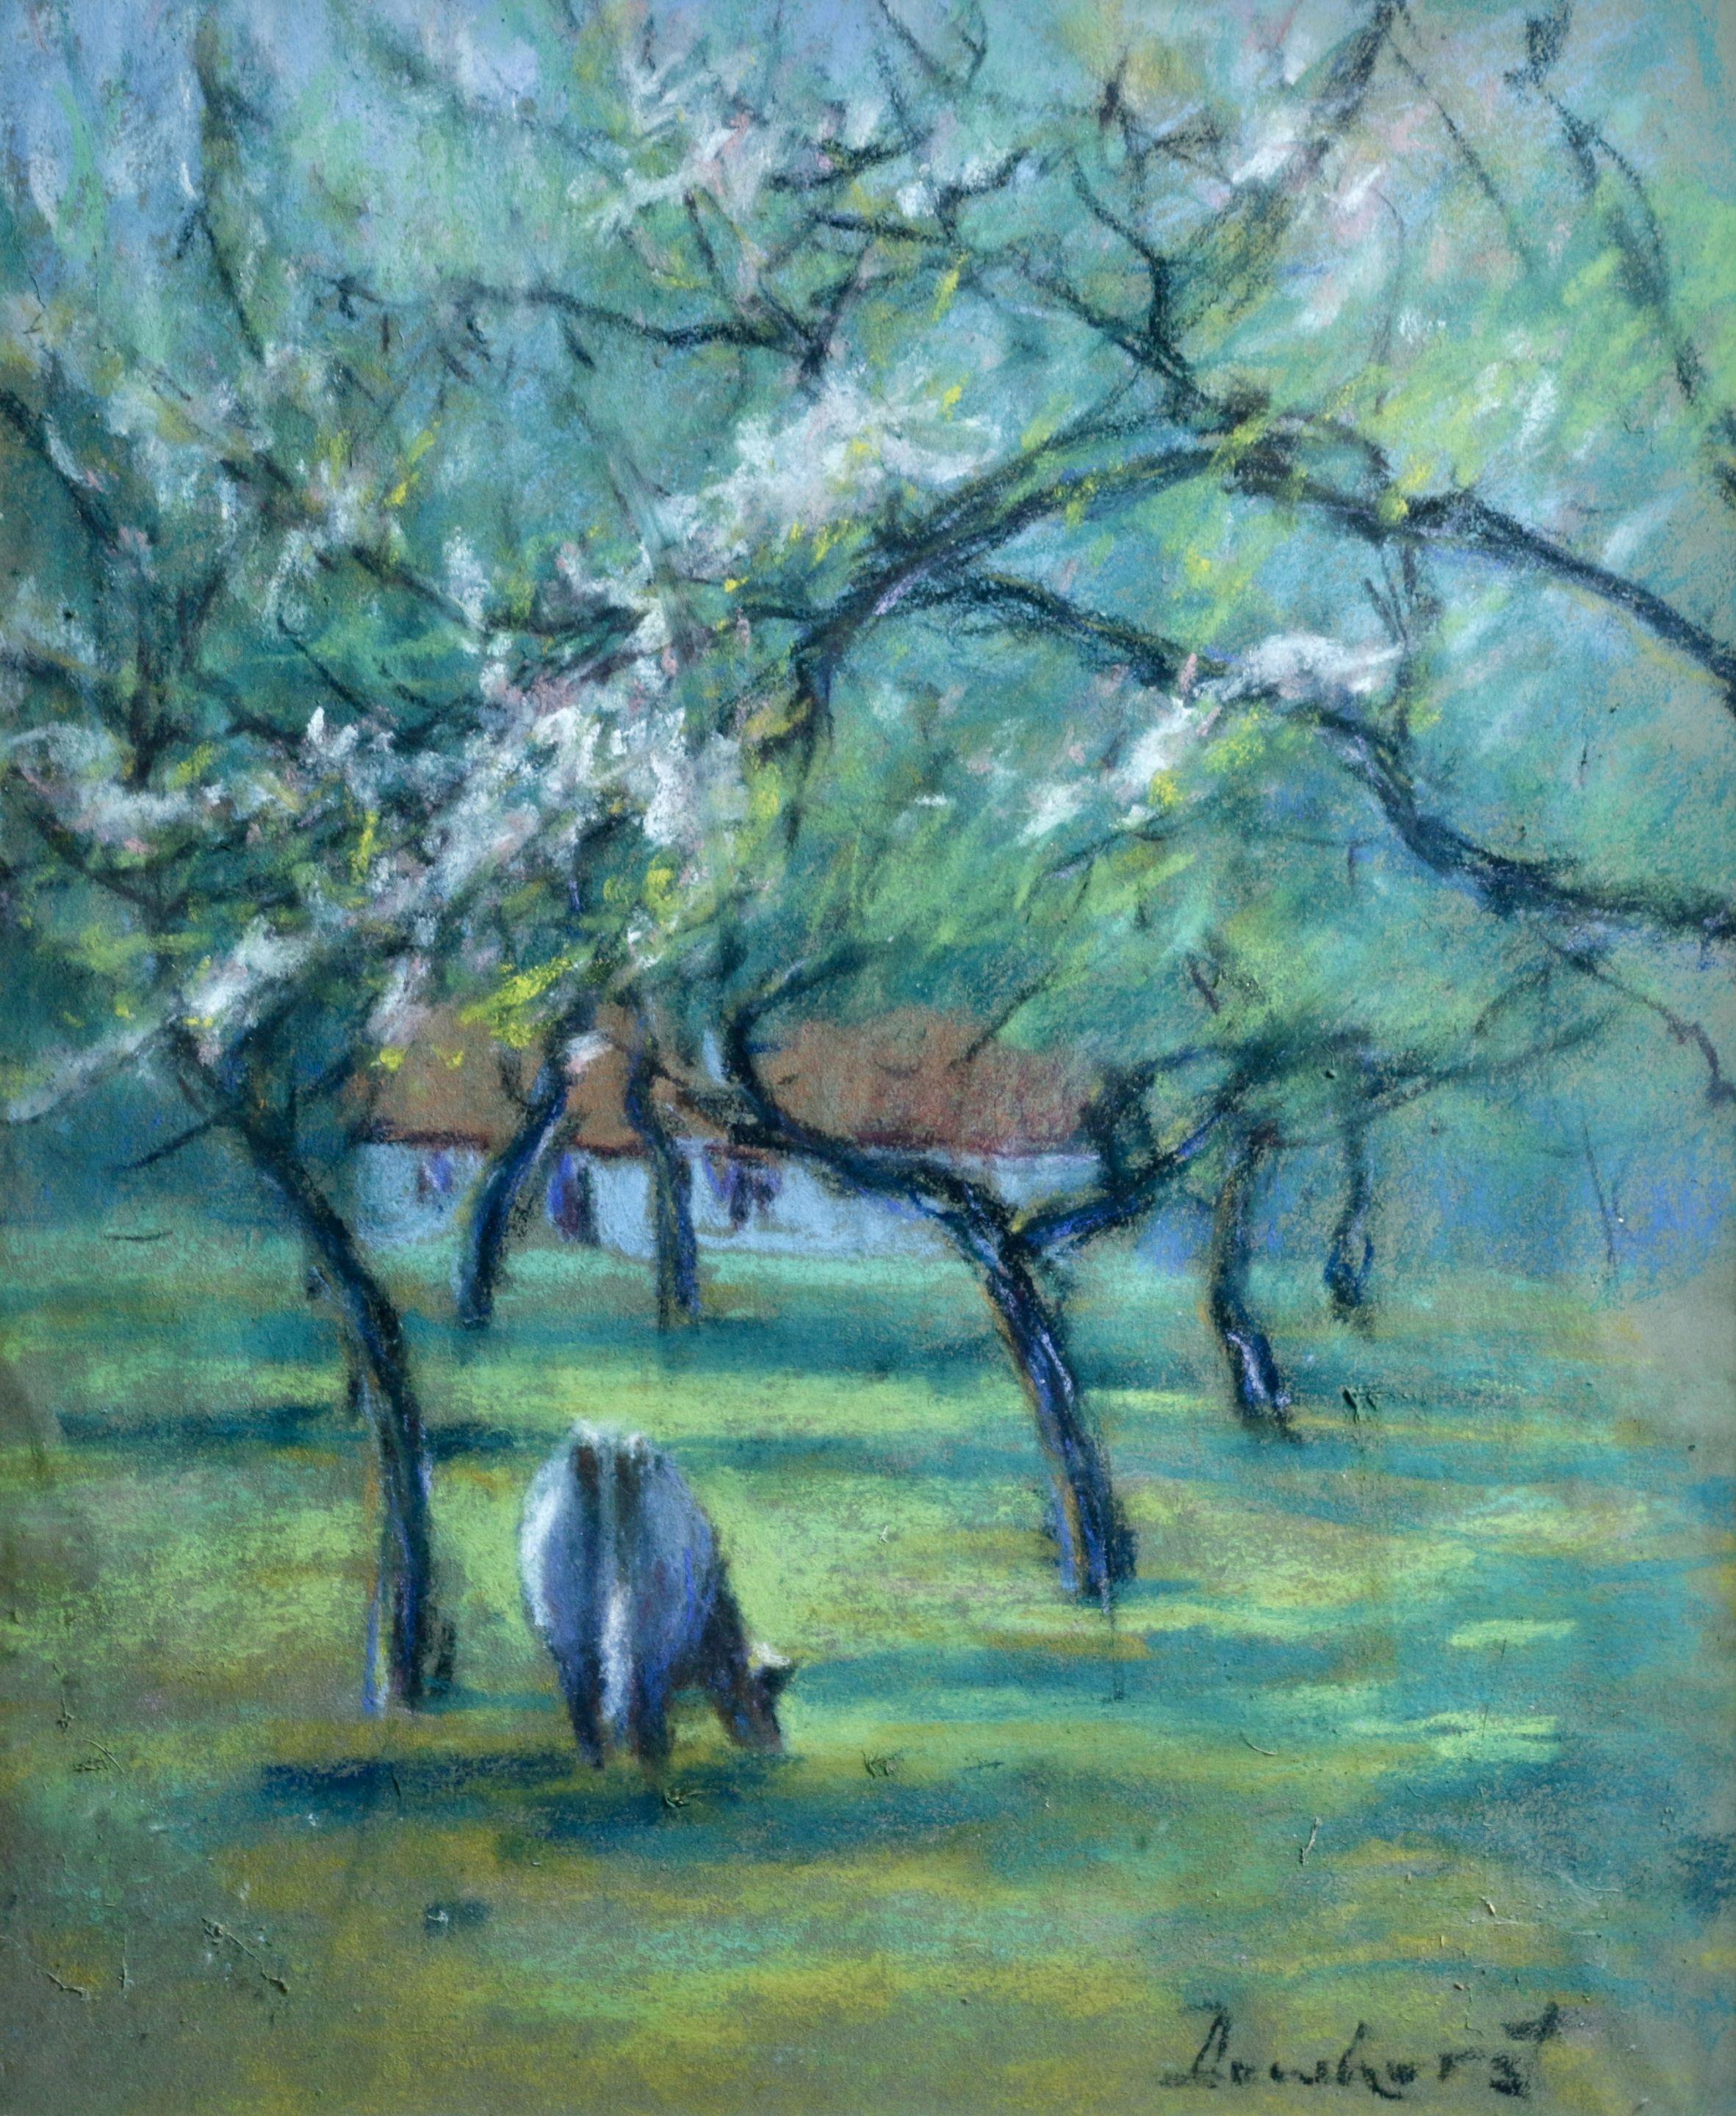 Wynford Dewhurst Landscape Art - Cattle in an Orchard - 20th Century Pastel, Cow & Trees in Landscape by Dewhurst